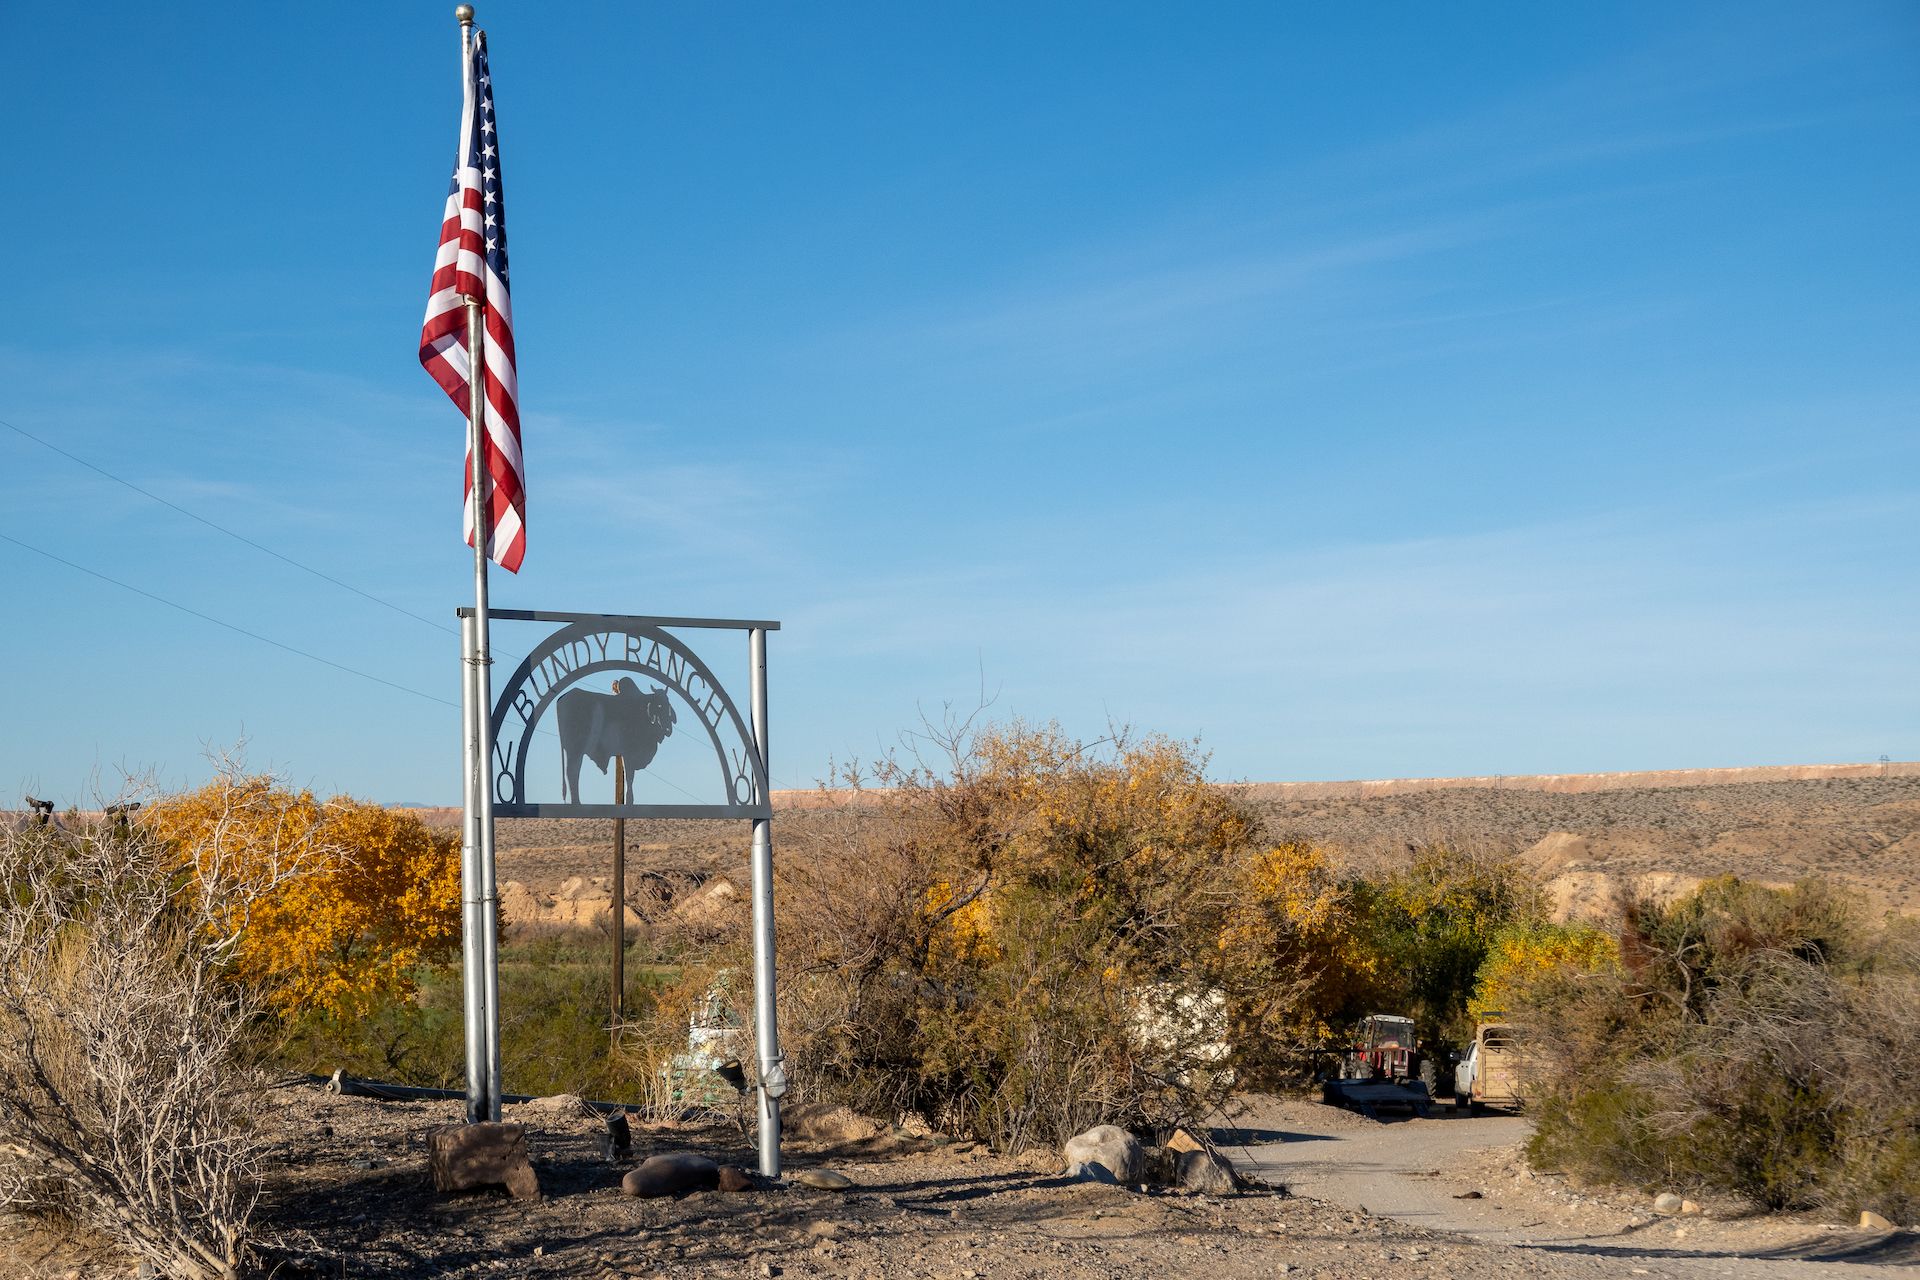 For the first few miles of the Gold Butte road, you’ll pass by a few ranches including the infamous “Bundy Ranch”. Google it if you do not remember the story…